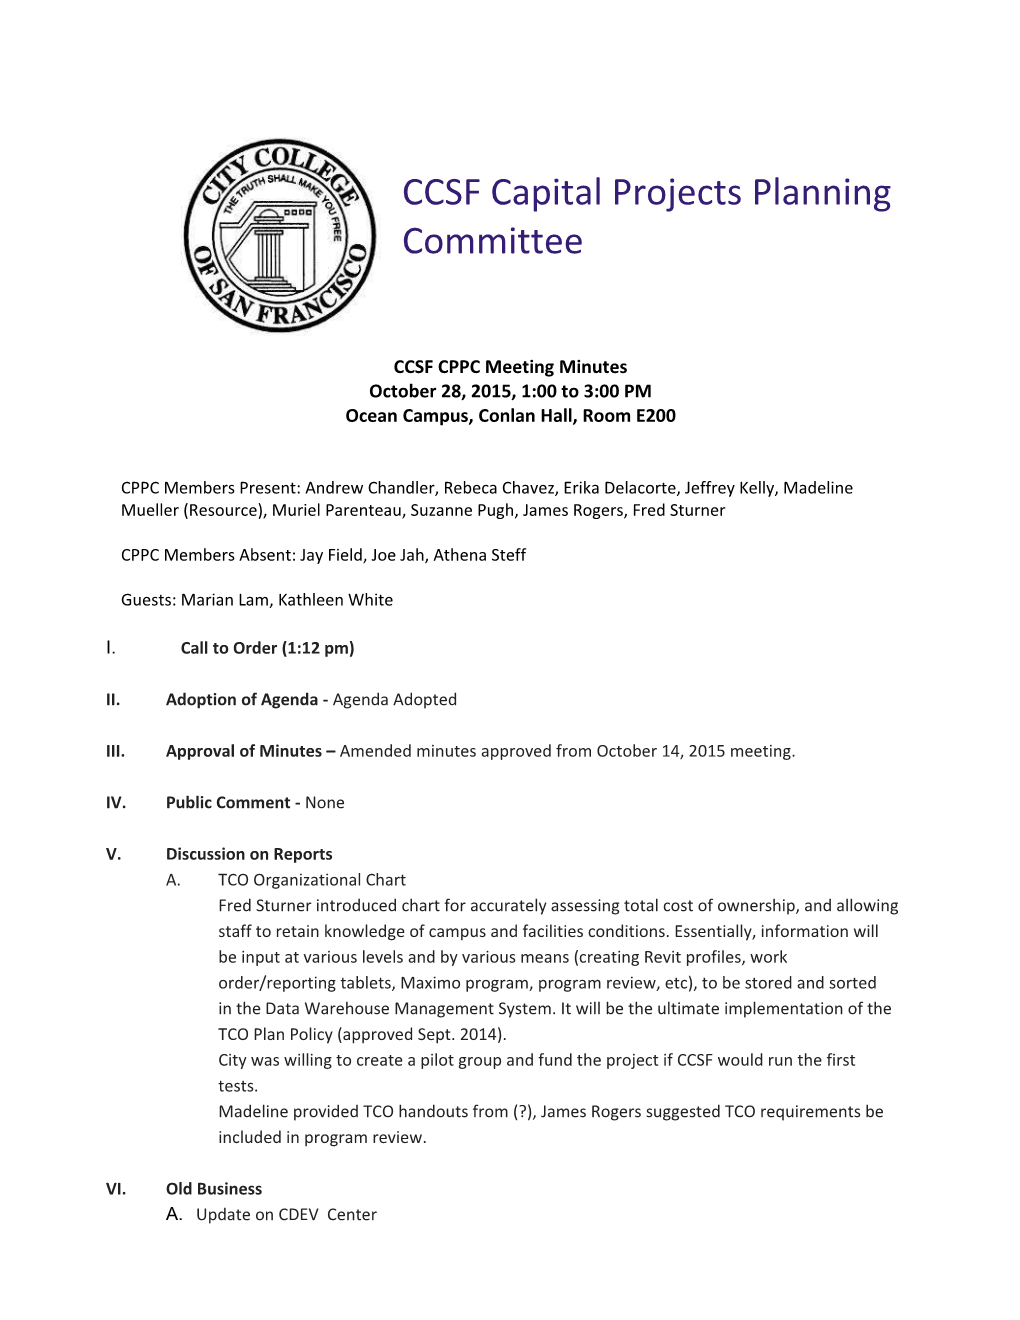 CCSF CPPC Meeting Minutes